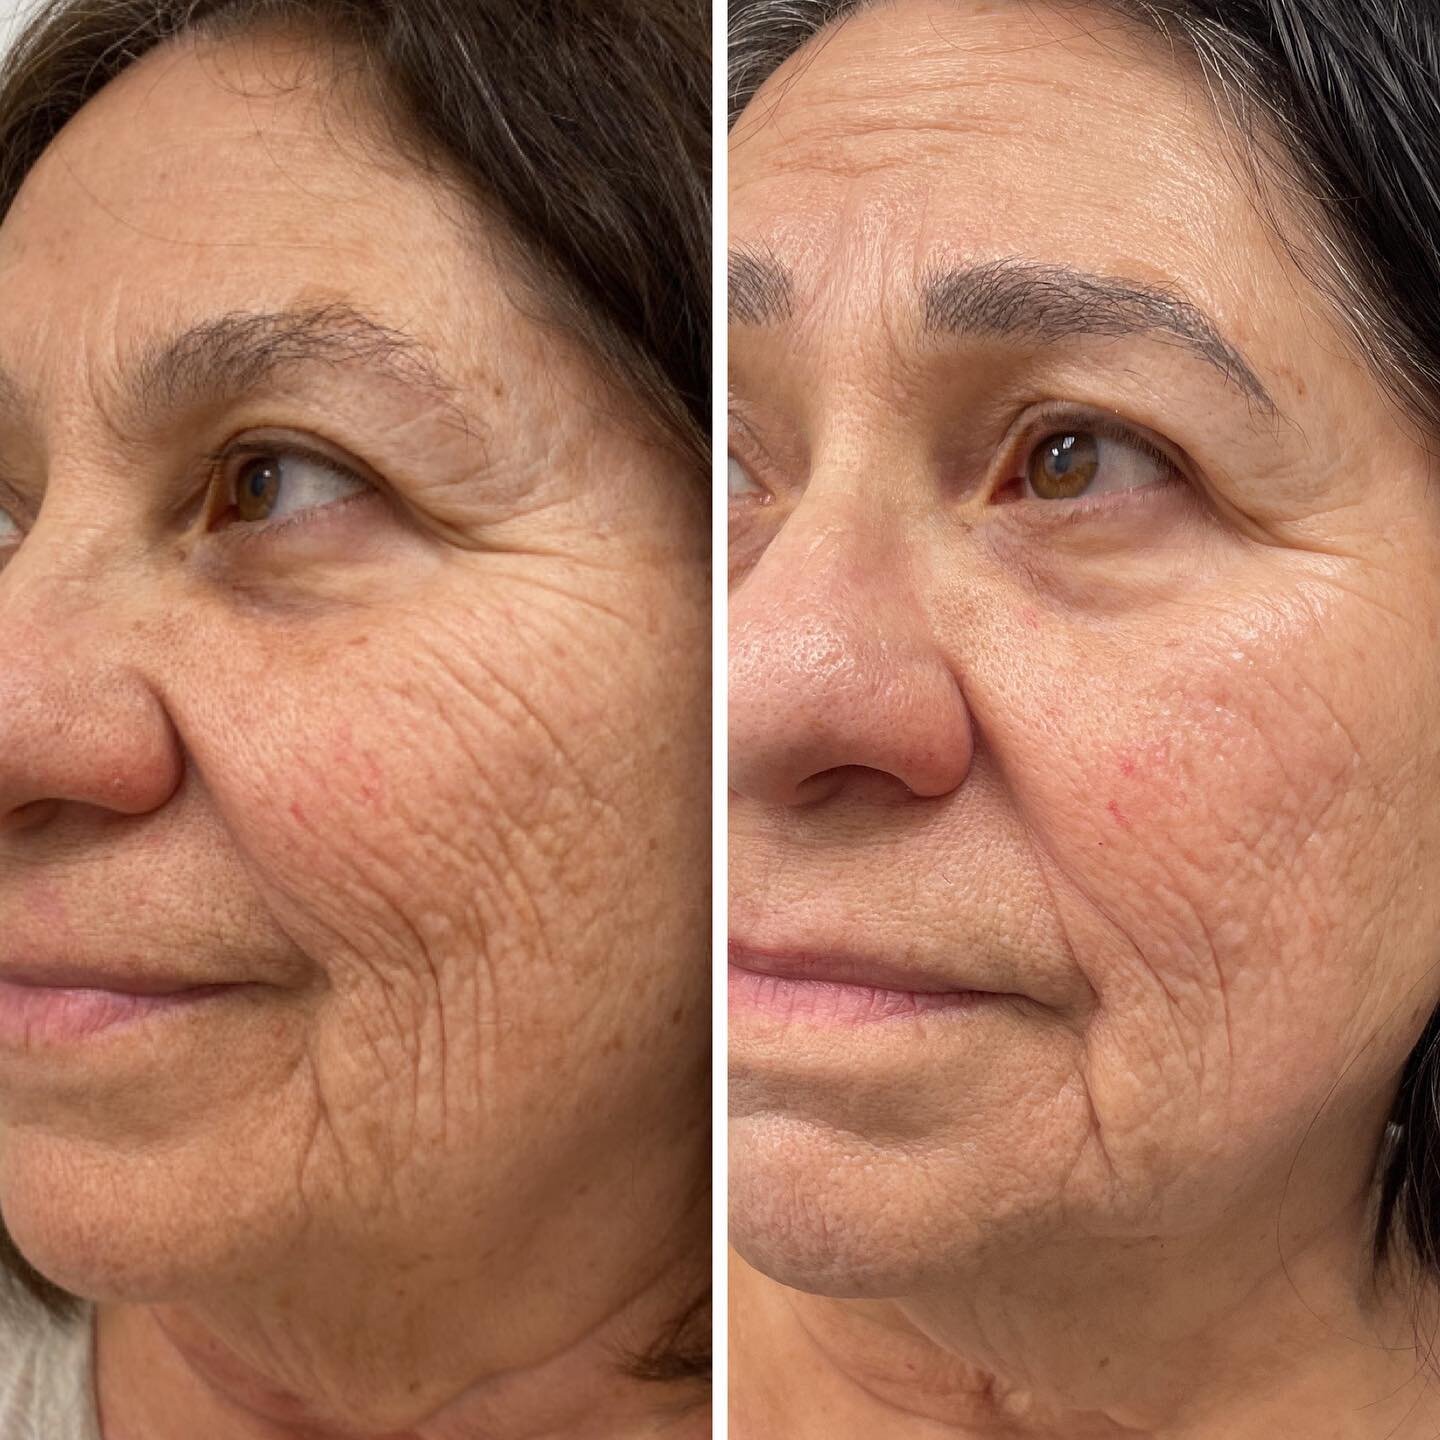 Starting to see a difference!

Clients skin is now properly hydrated, smooth and skin tone has improved.

We will continue treatments to help minimize fine lines and wrinkles but client is happy overall.

I wish I had a magic 🪄 wand to speed up the 